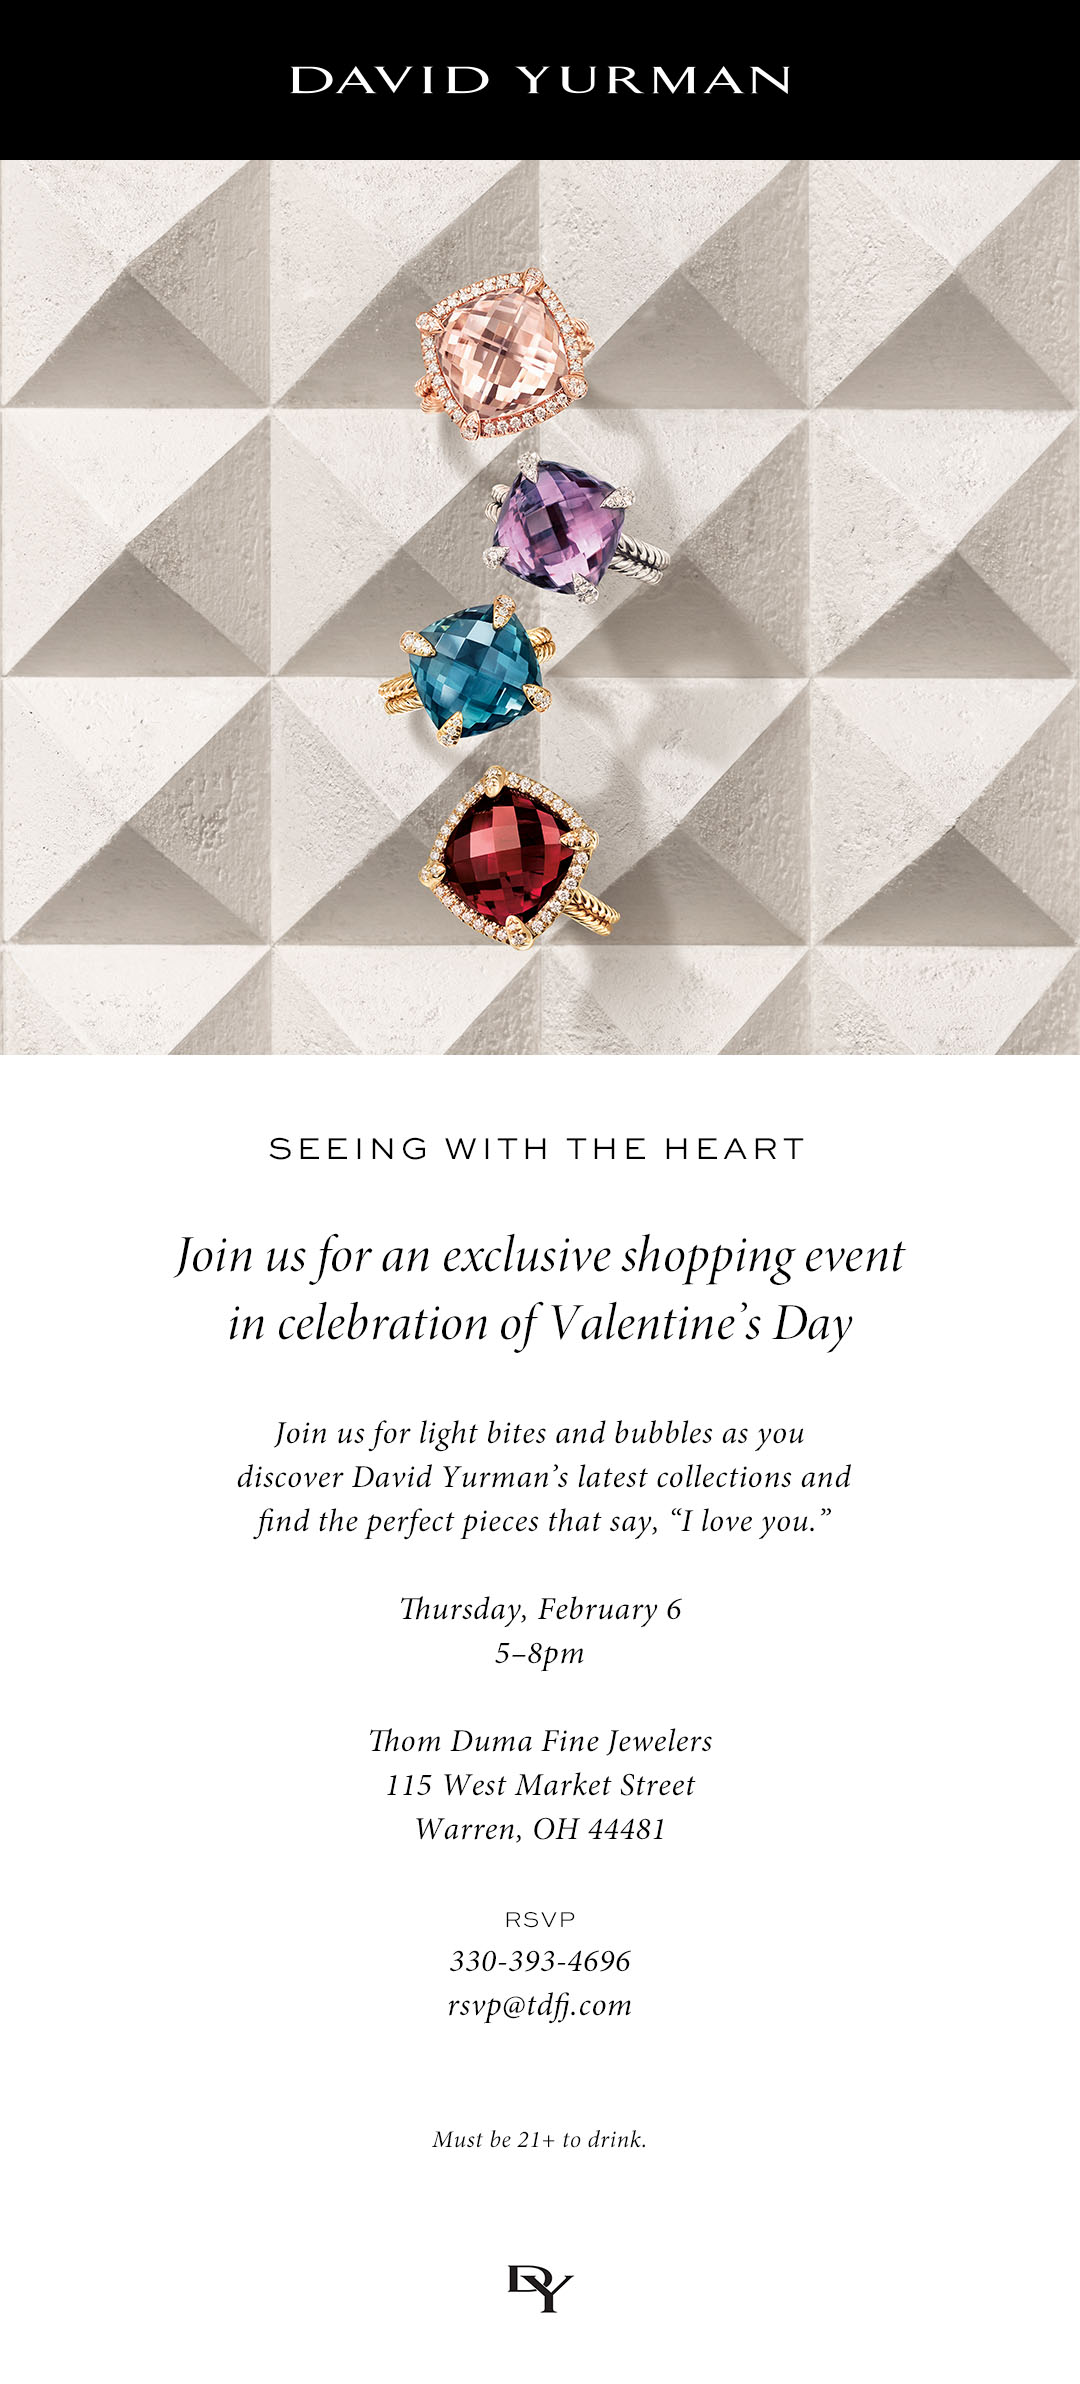 From February 6th to the 9th, Jeweler Thom Duma Fine Jewelers Will Be Holding a Special David Yurman Event